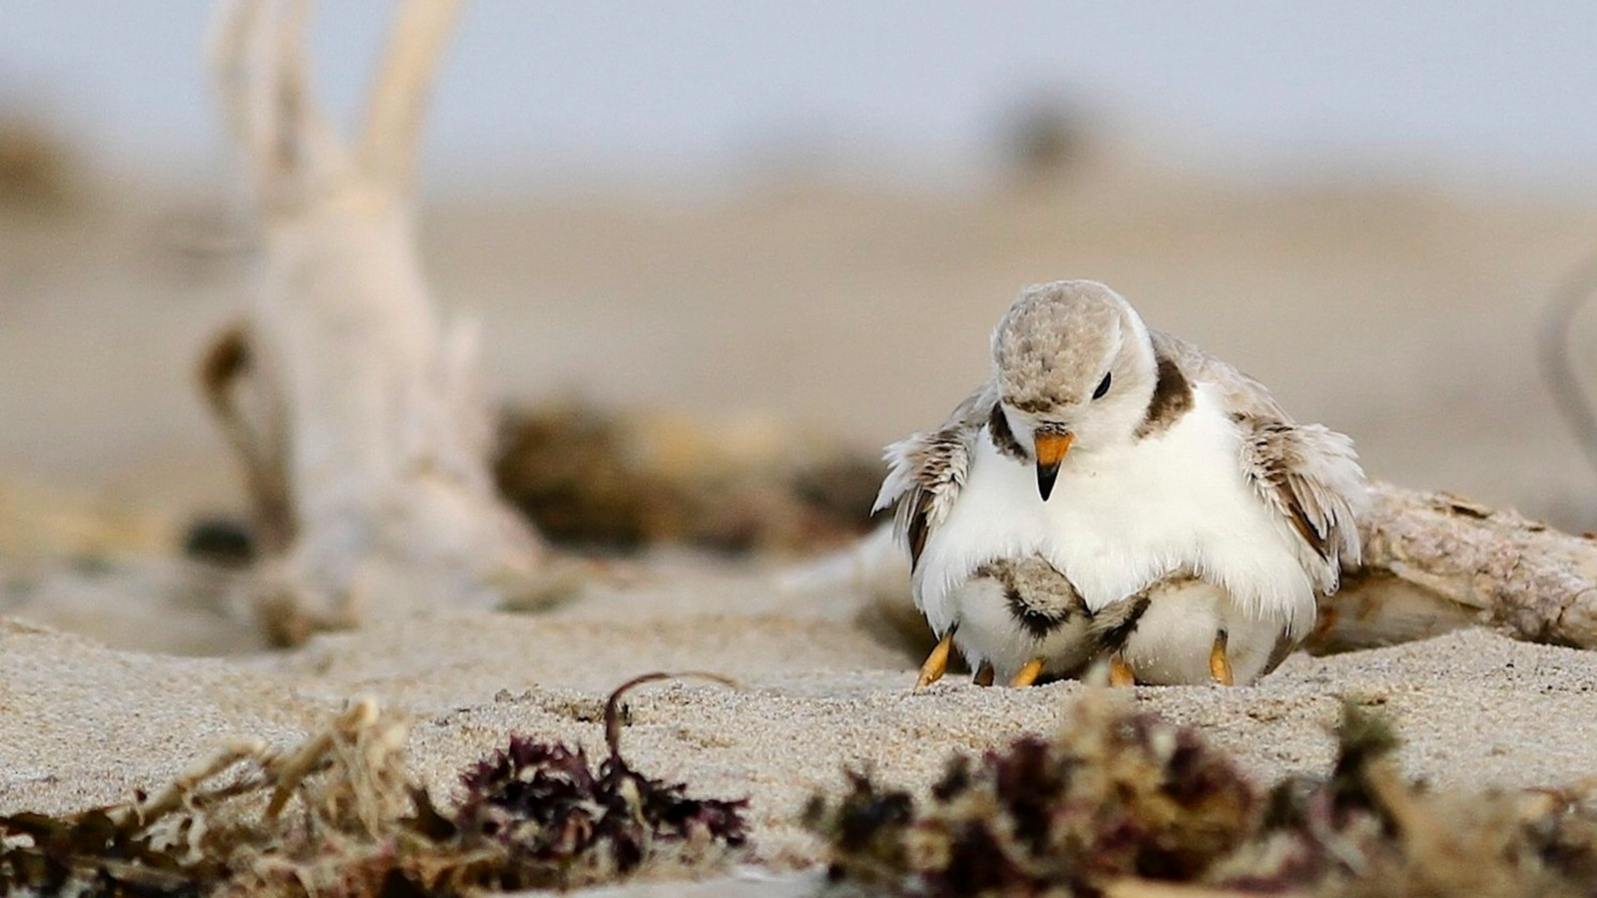 A Piping Plover parent watches as two of its fluffy chicks to nestle up beneath its belly. The family is on a beach littered with driftwood and rocks.